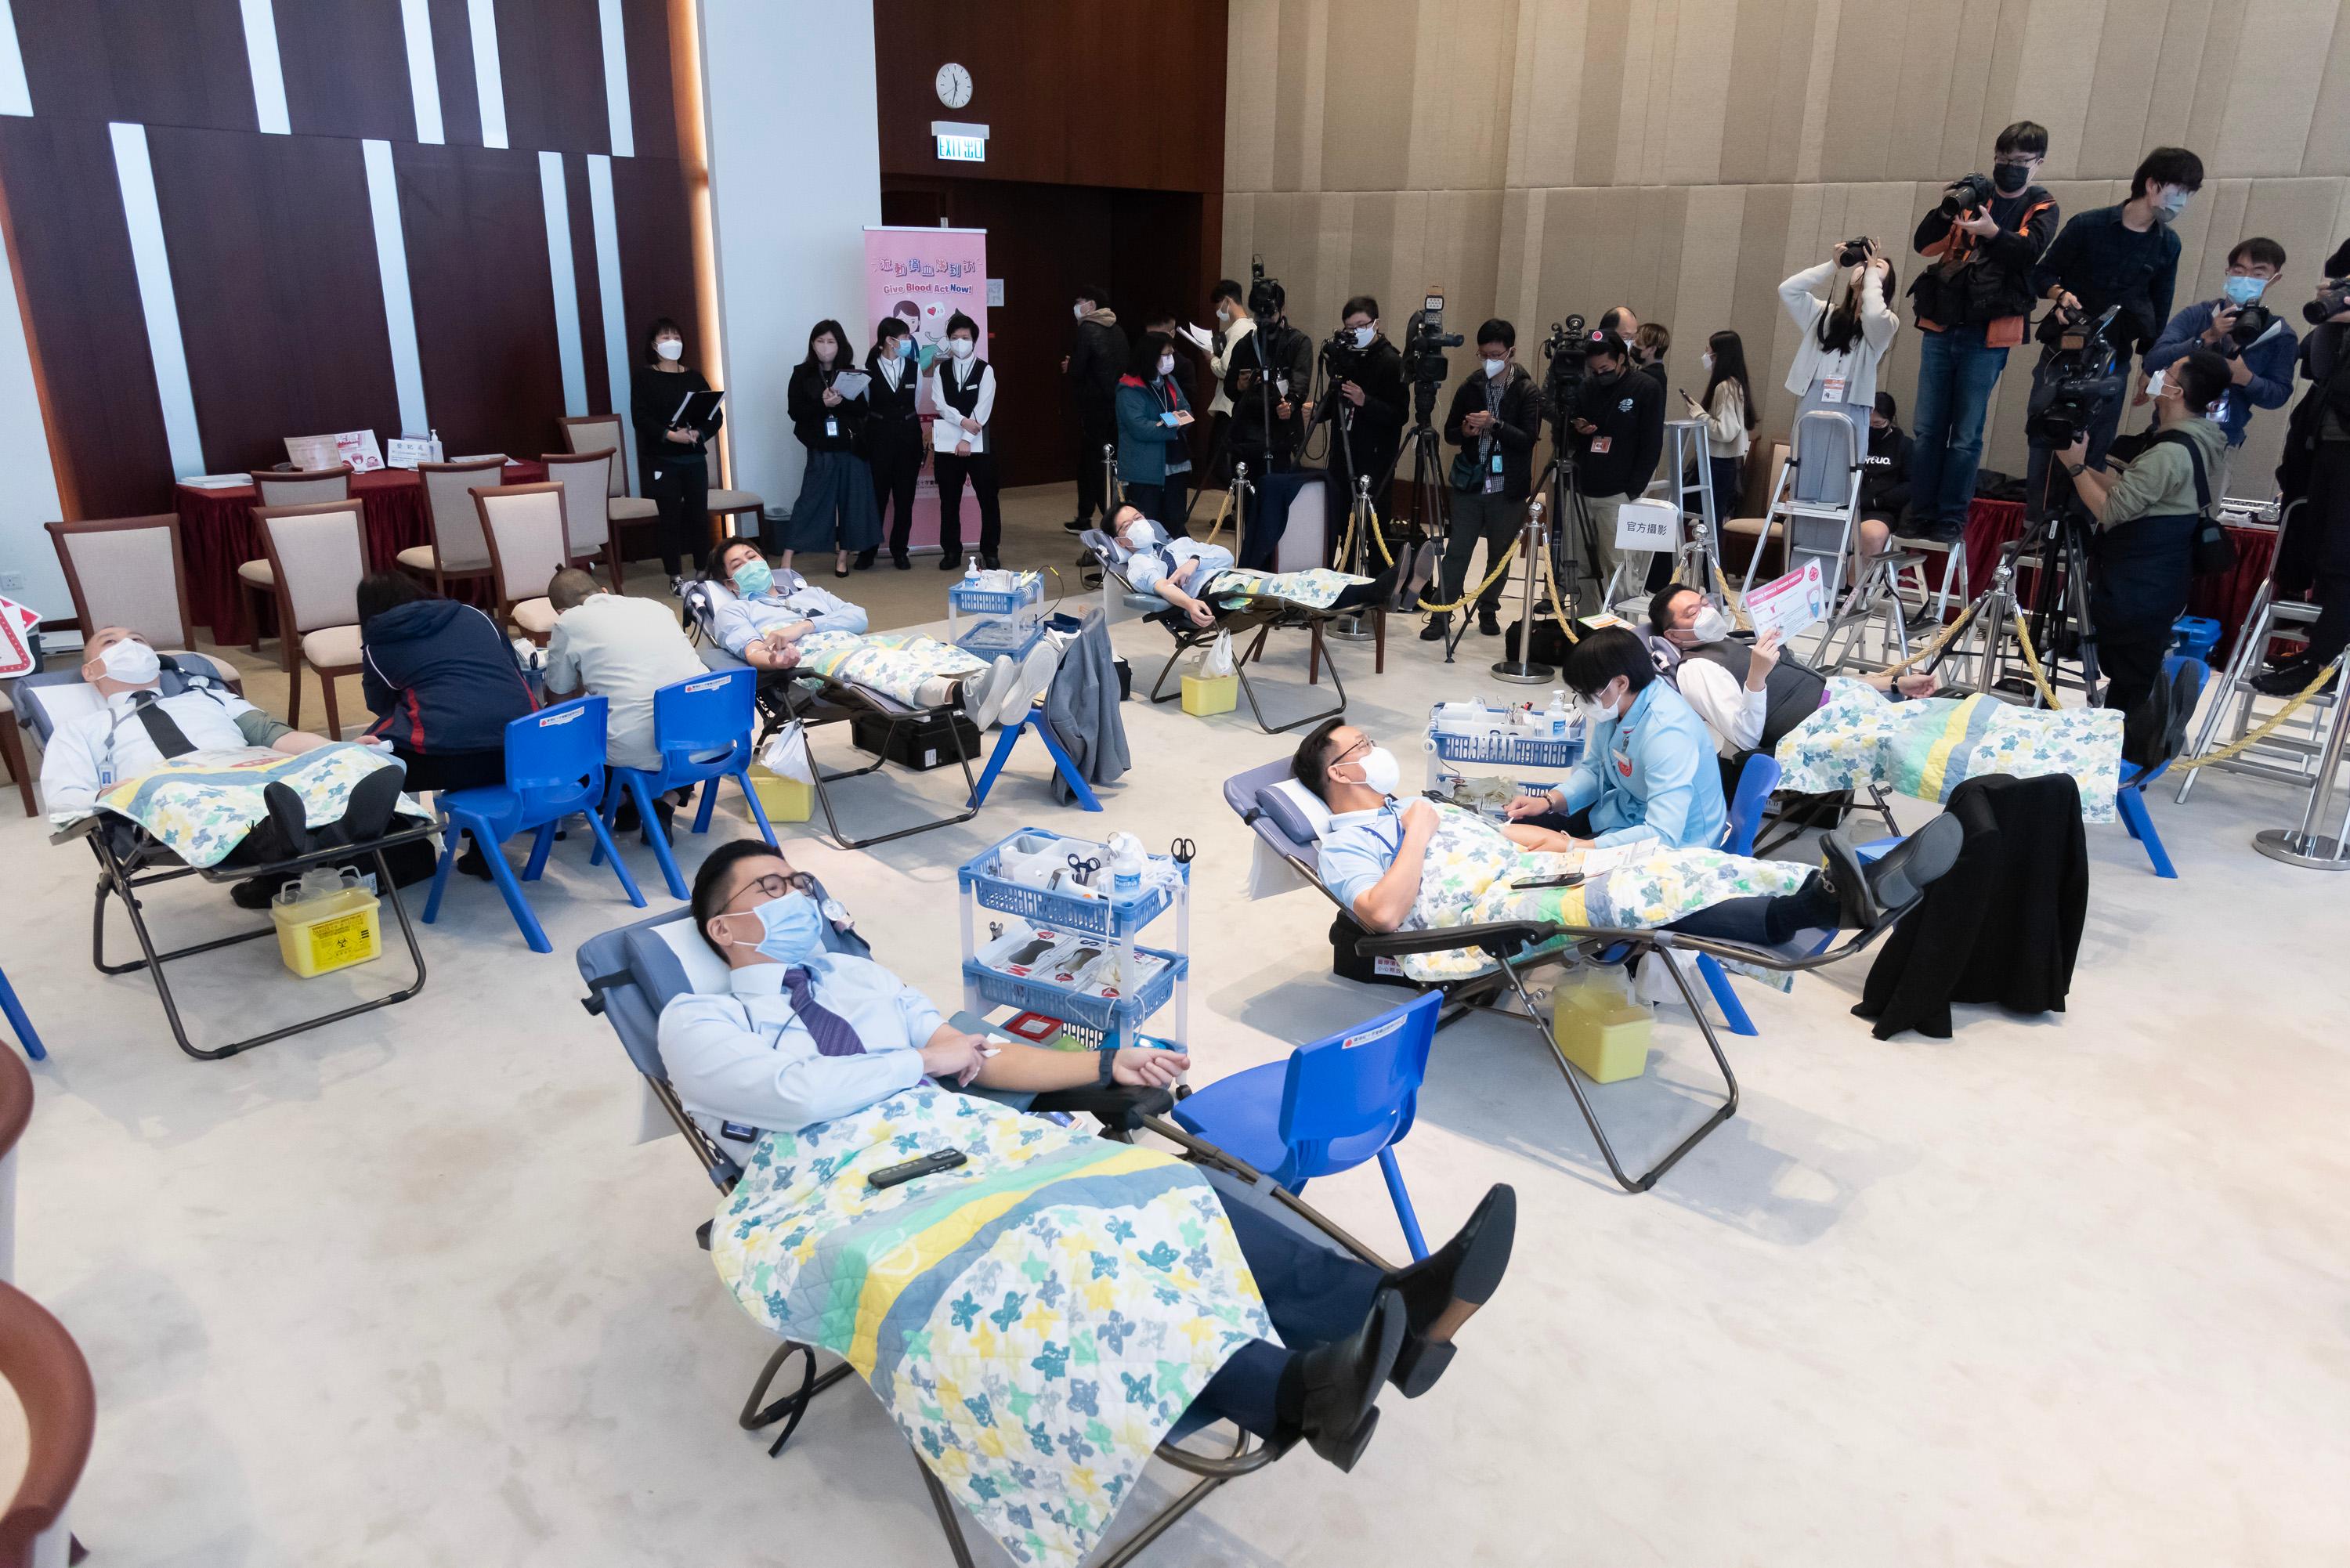 The Legislative Council (LegCo) Blood Donation Day was held at the Dining Hall in the LegCo Complex today (February 15). A total of 53 people took part in the event.